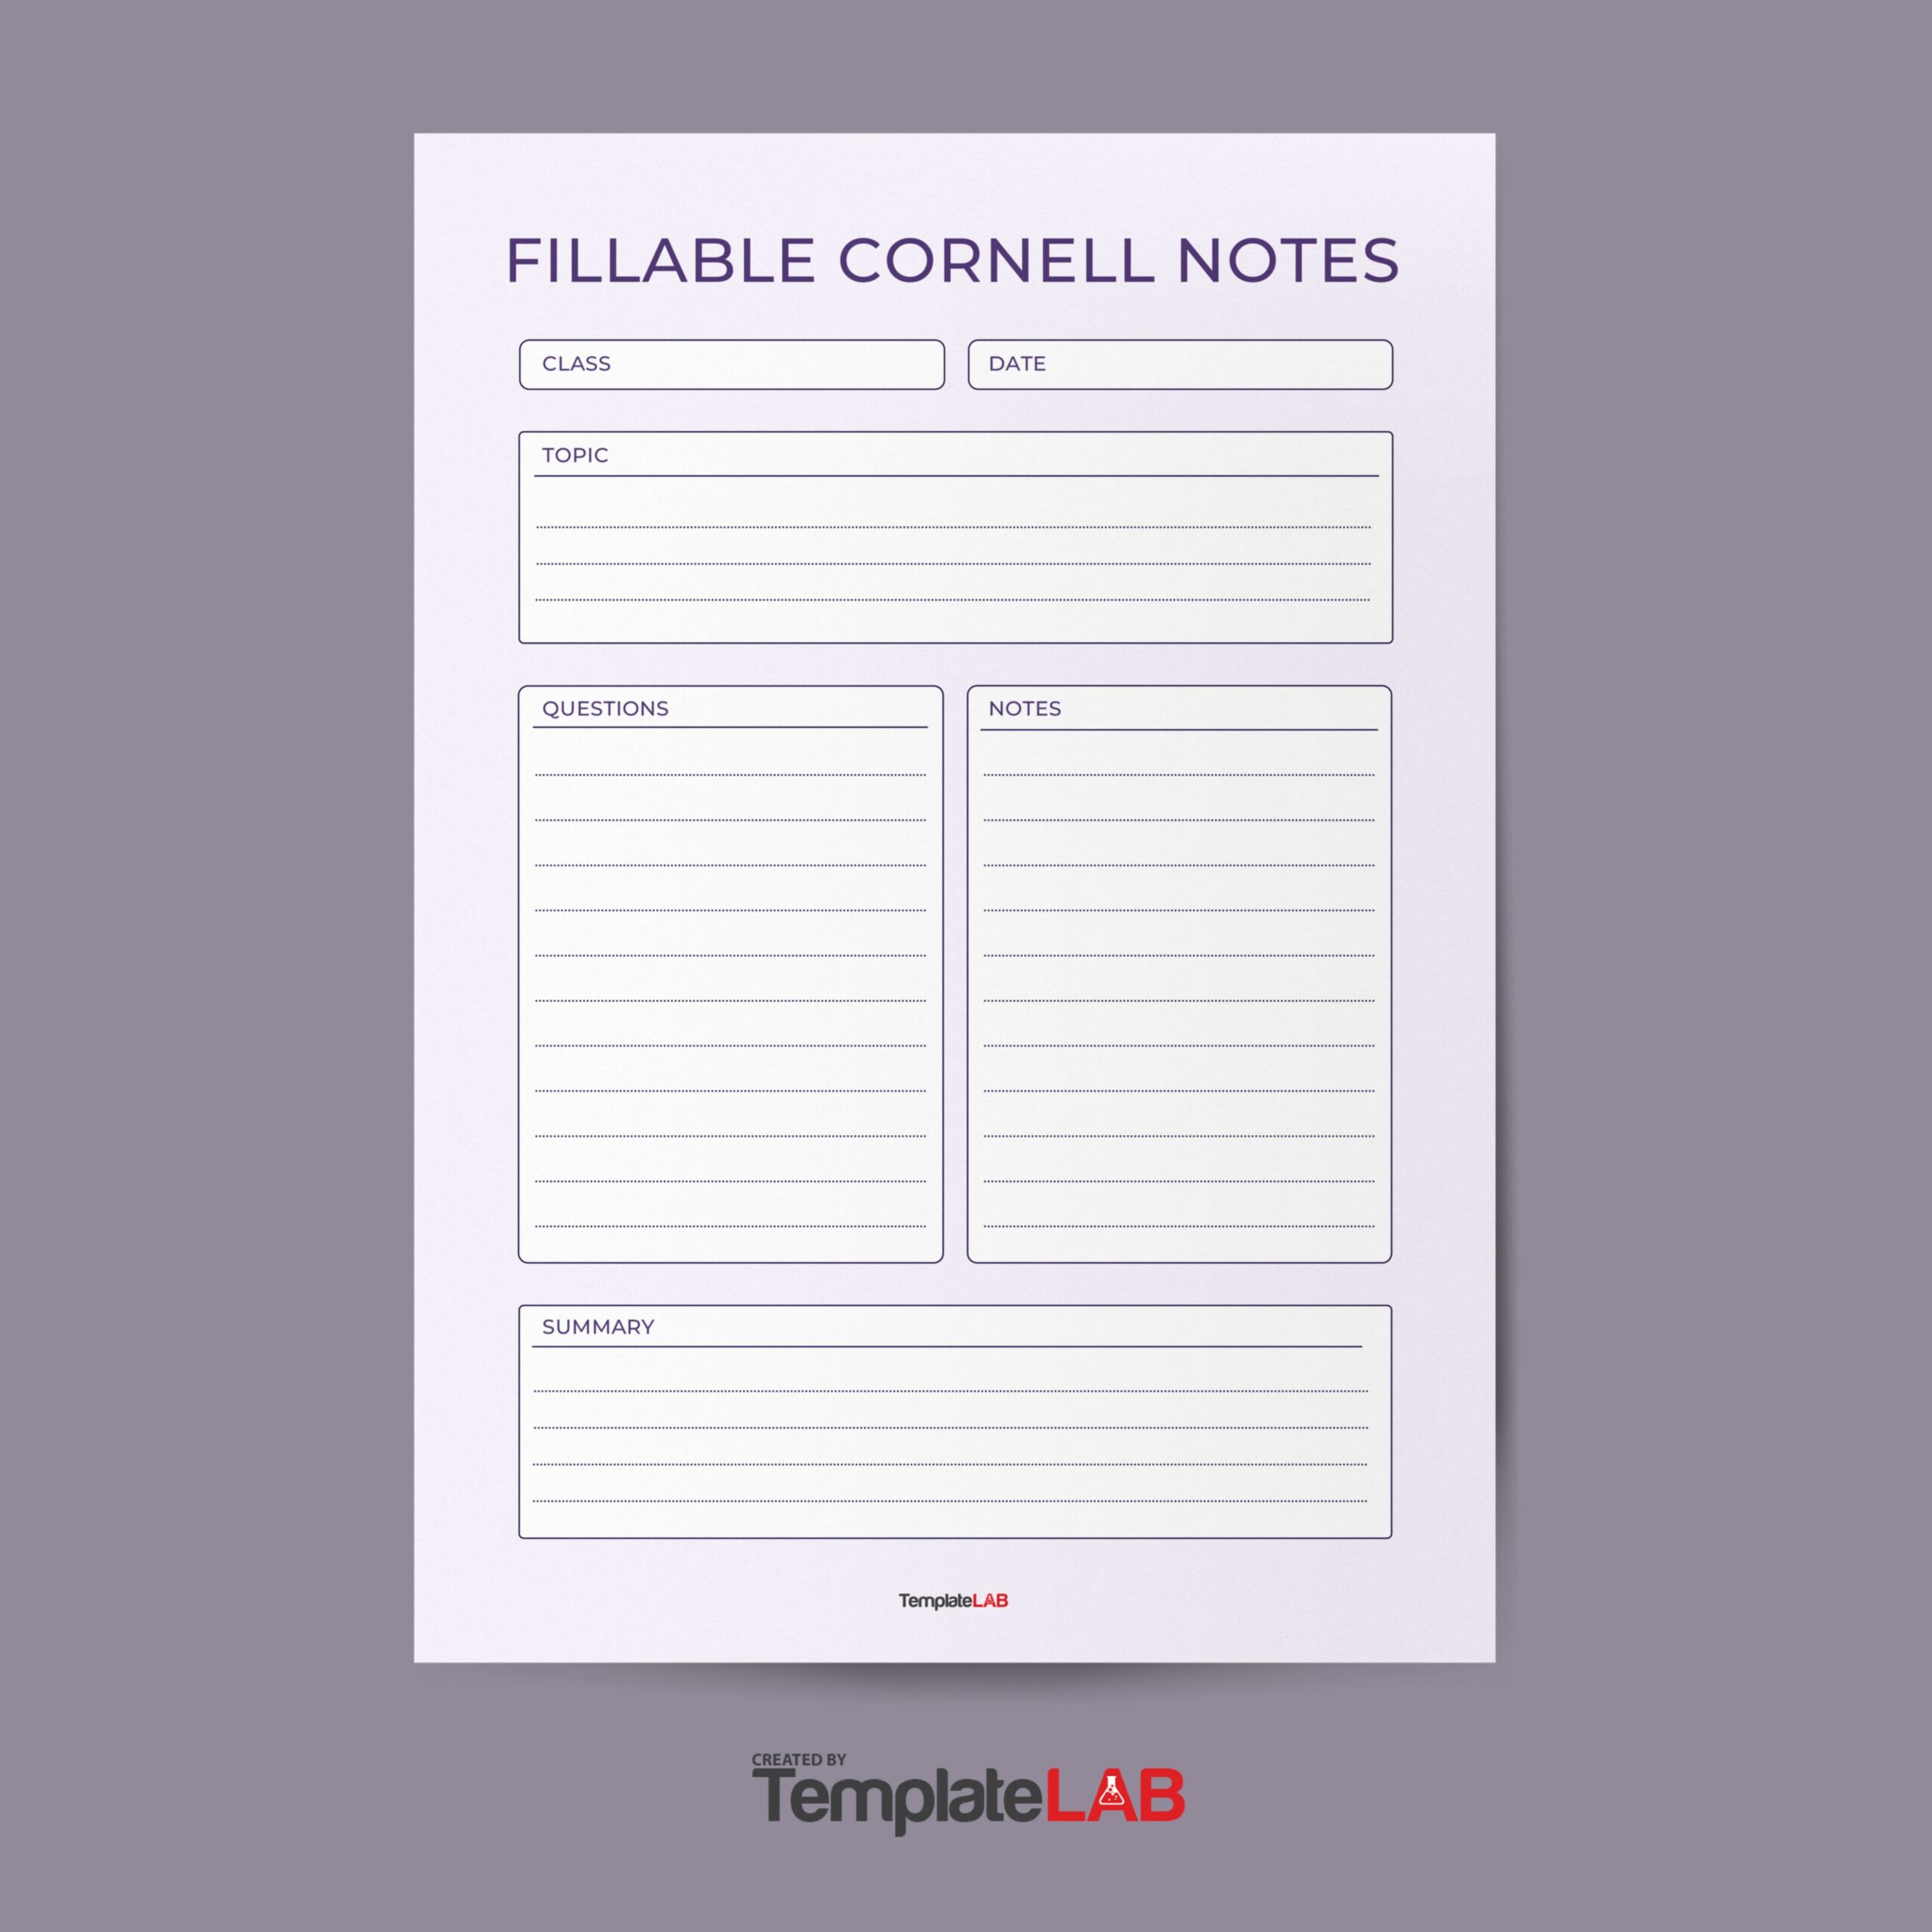 Free Fillable Cornell Notes Template